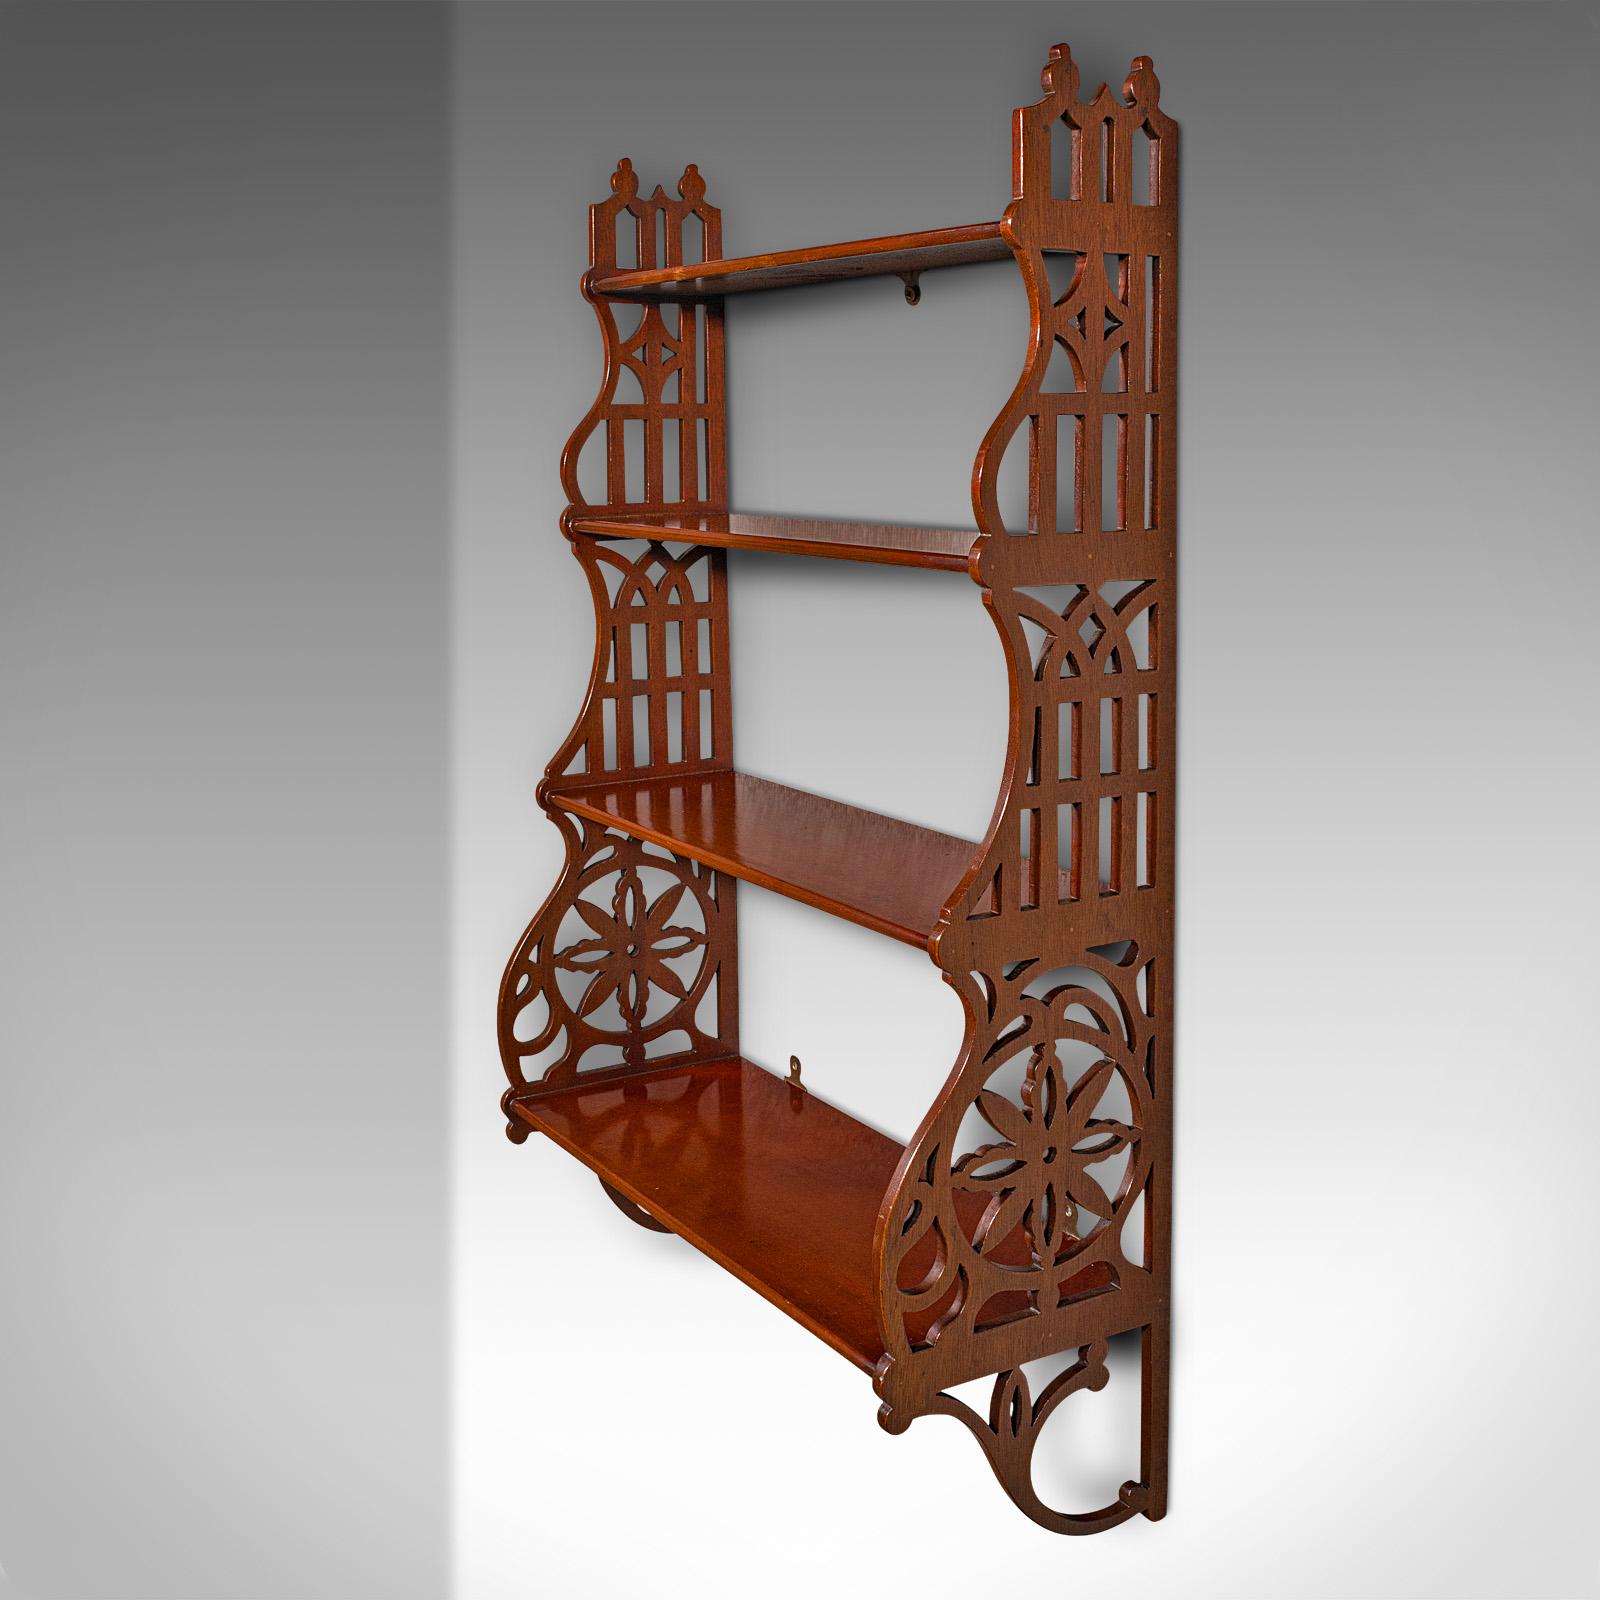 Antique 4-Tier Mounted Whatnot, English, Wall Display Shelves, Edwardian, C.1910 In Good Condition For Sale In Hele, Devon, GB